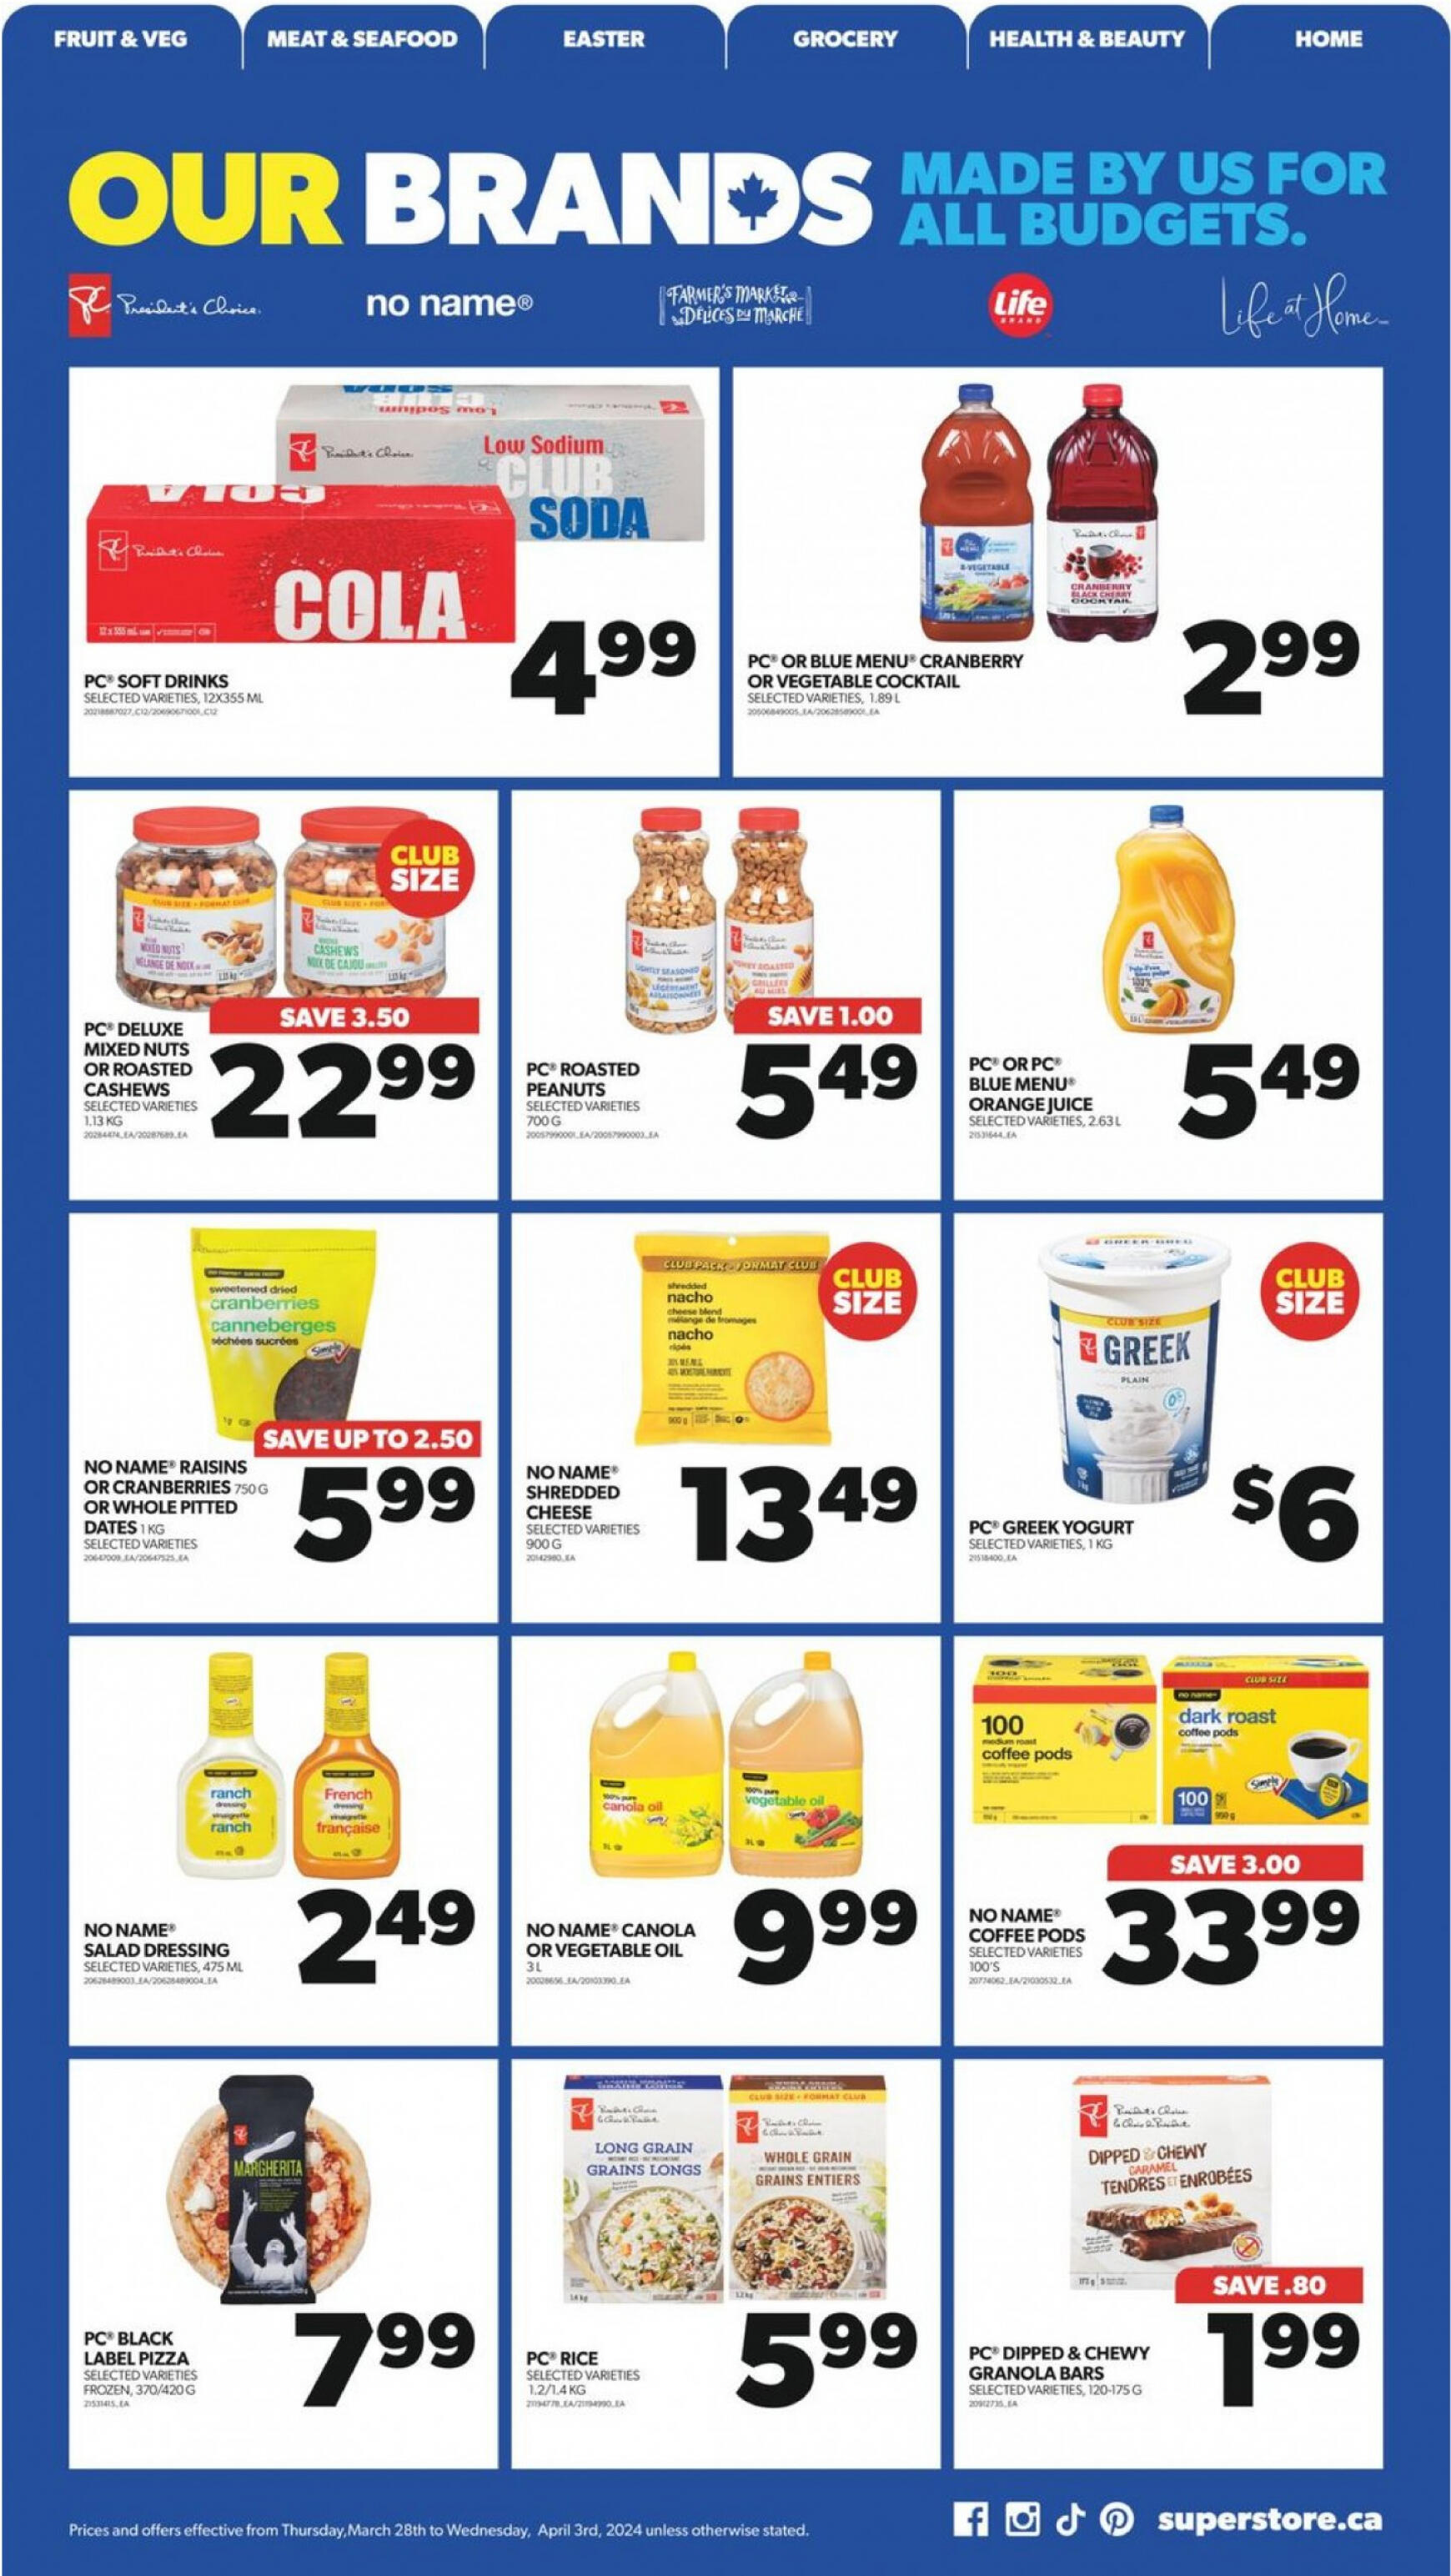 real-canadian-superstore - Real Canadian Superstore flyer current 28.03. - 03.04. - page: 18